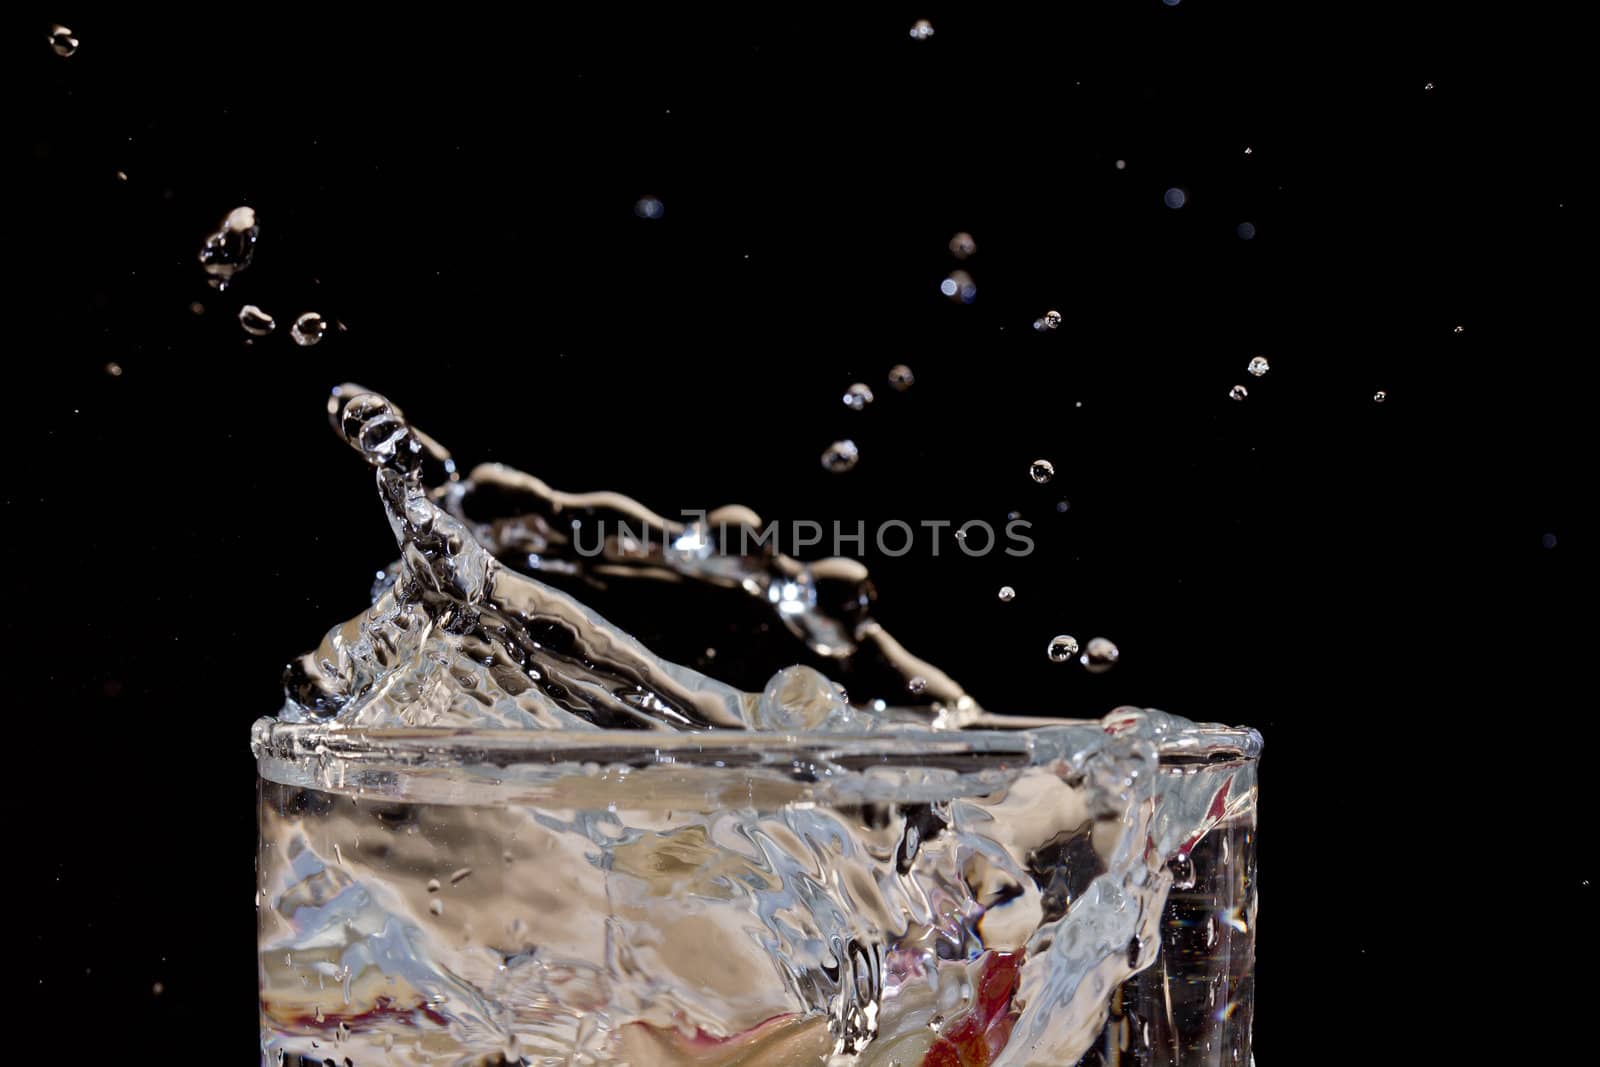 The motion of a slice of apple splashing into a glass of water